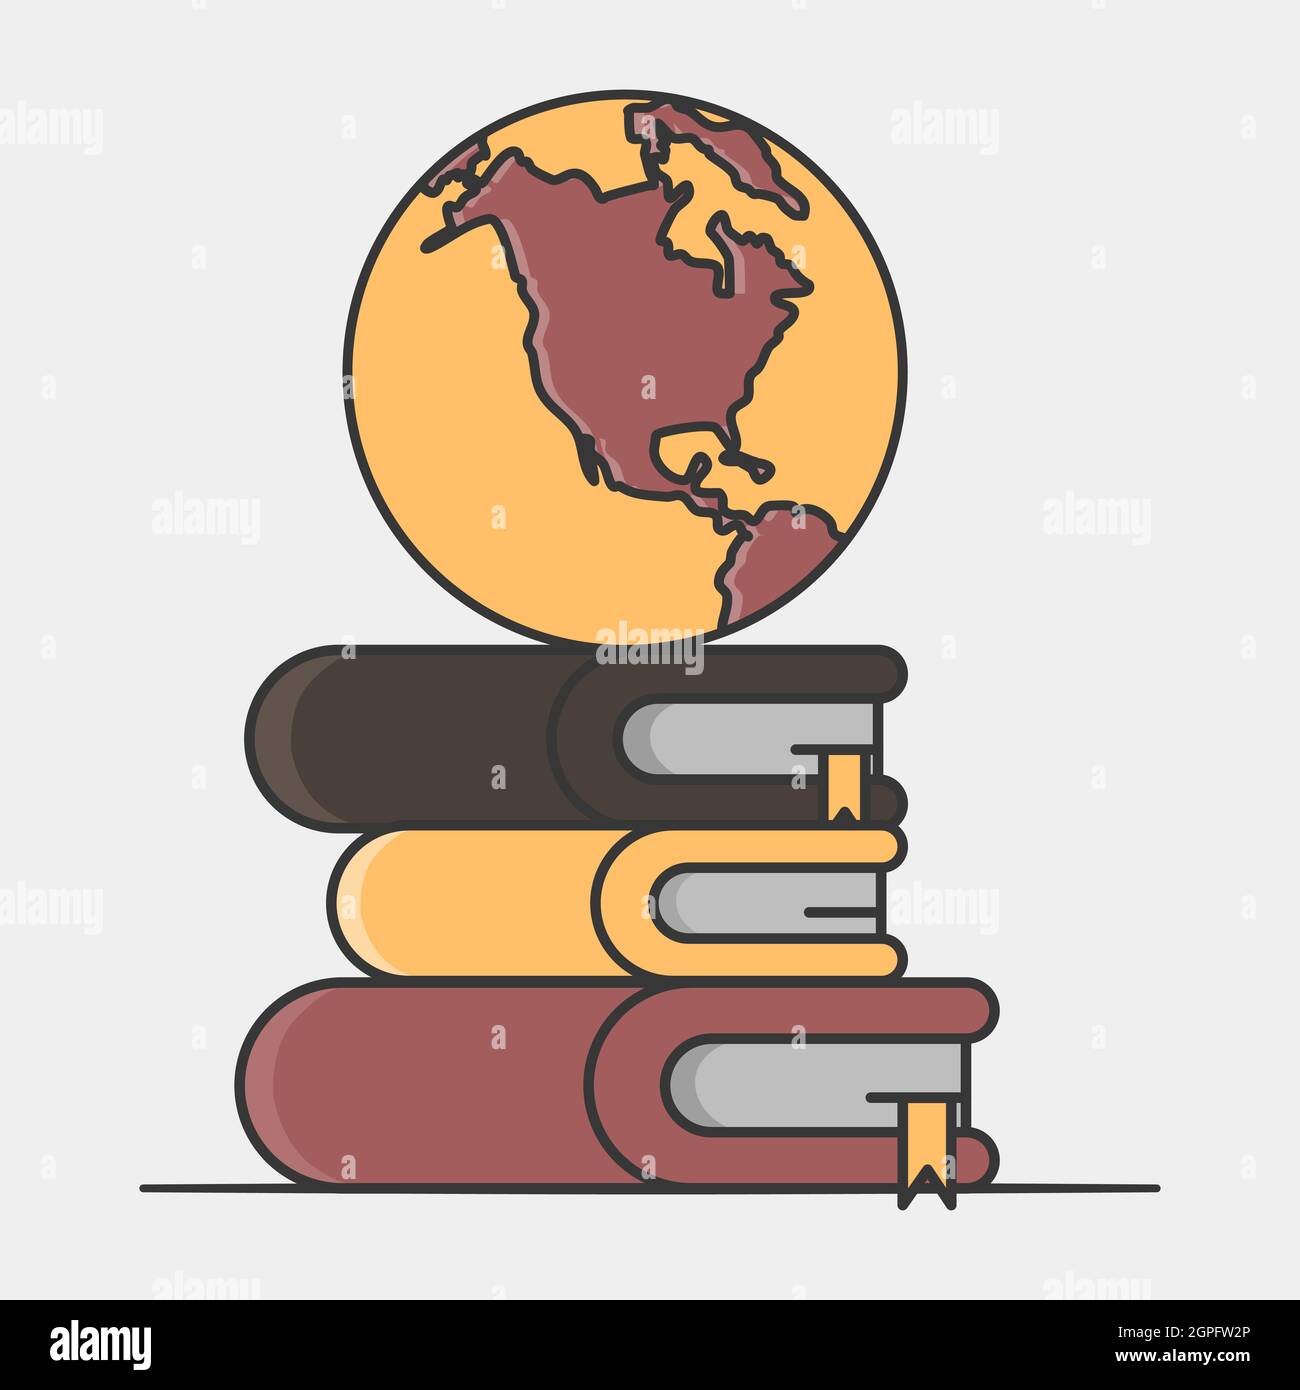 Globe on top of a pile of thick books. World history books concept. Global library. Flat style illustration. Isolated. Stock Vector